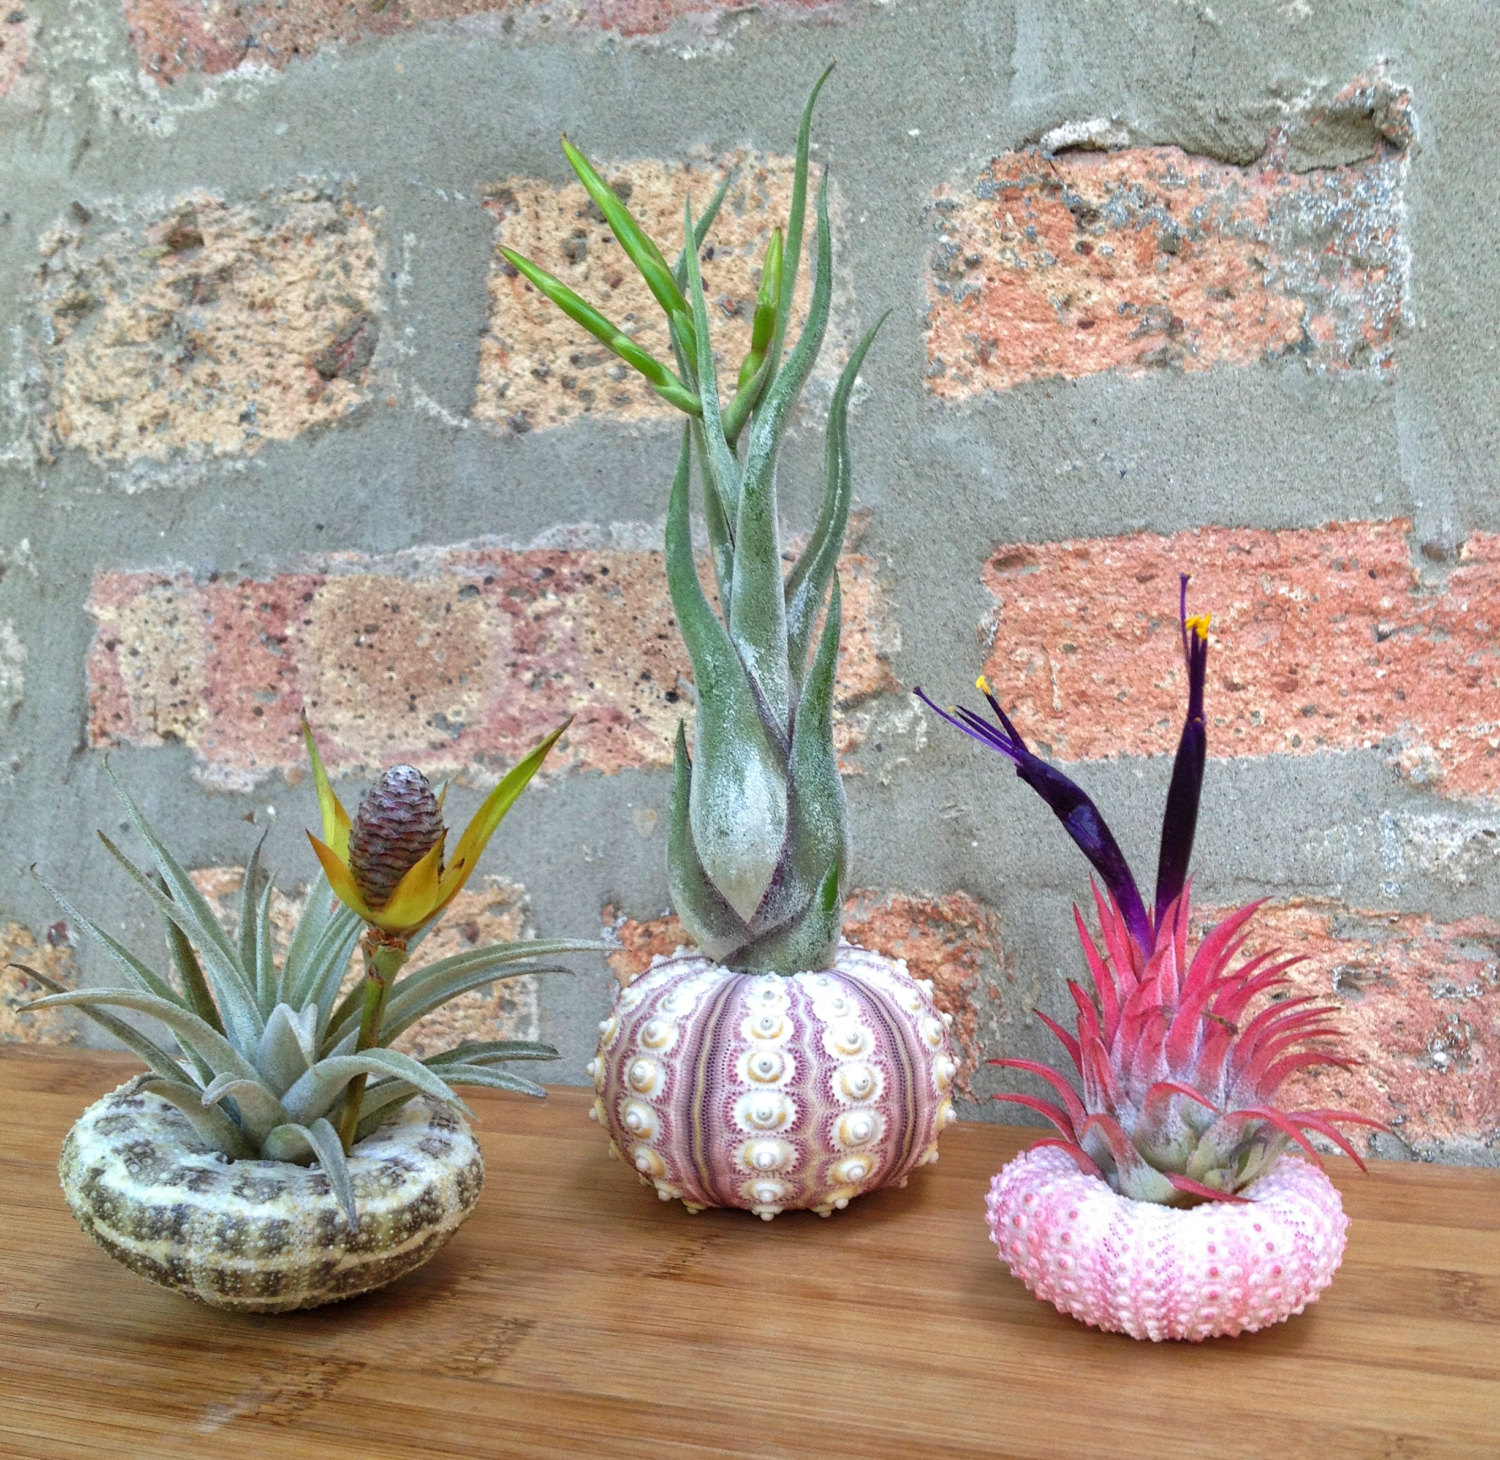 Air plant sea urchin pack from Etsy shop Lovely Terrariums